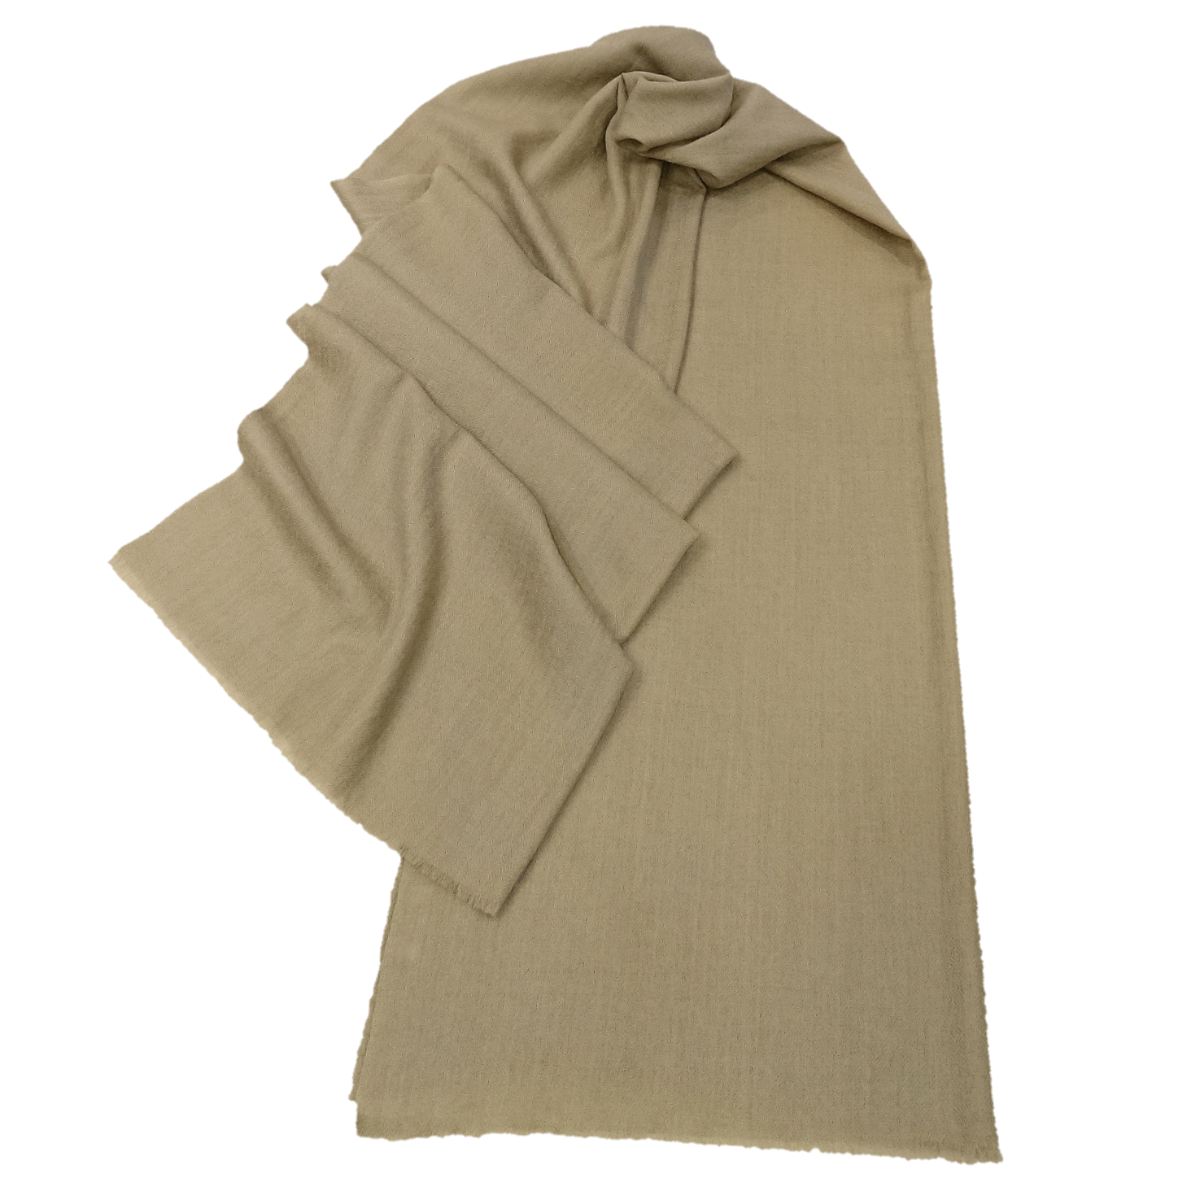 Fine And Lightweight Pashmina Stole - Large Scarf